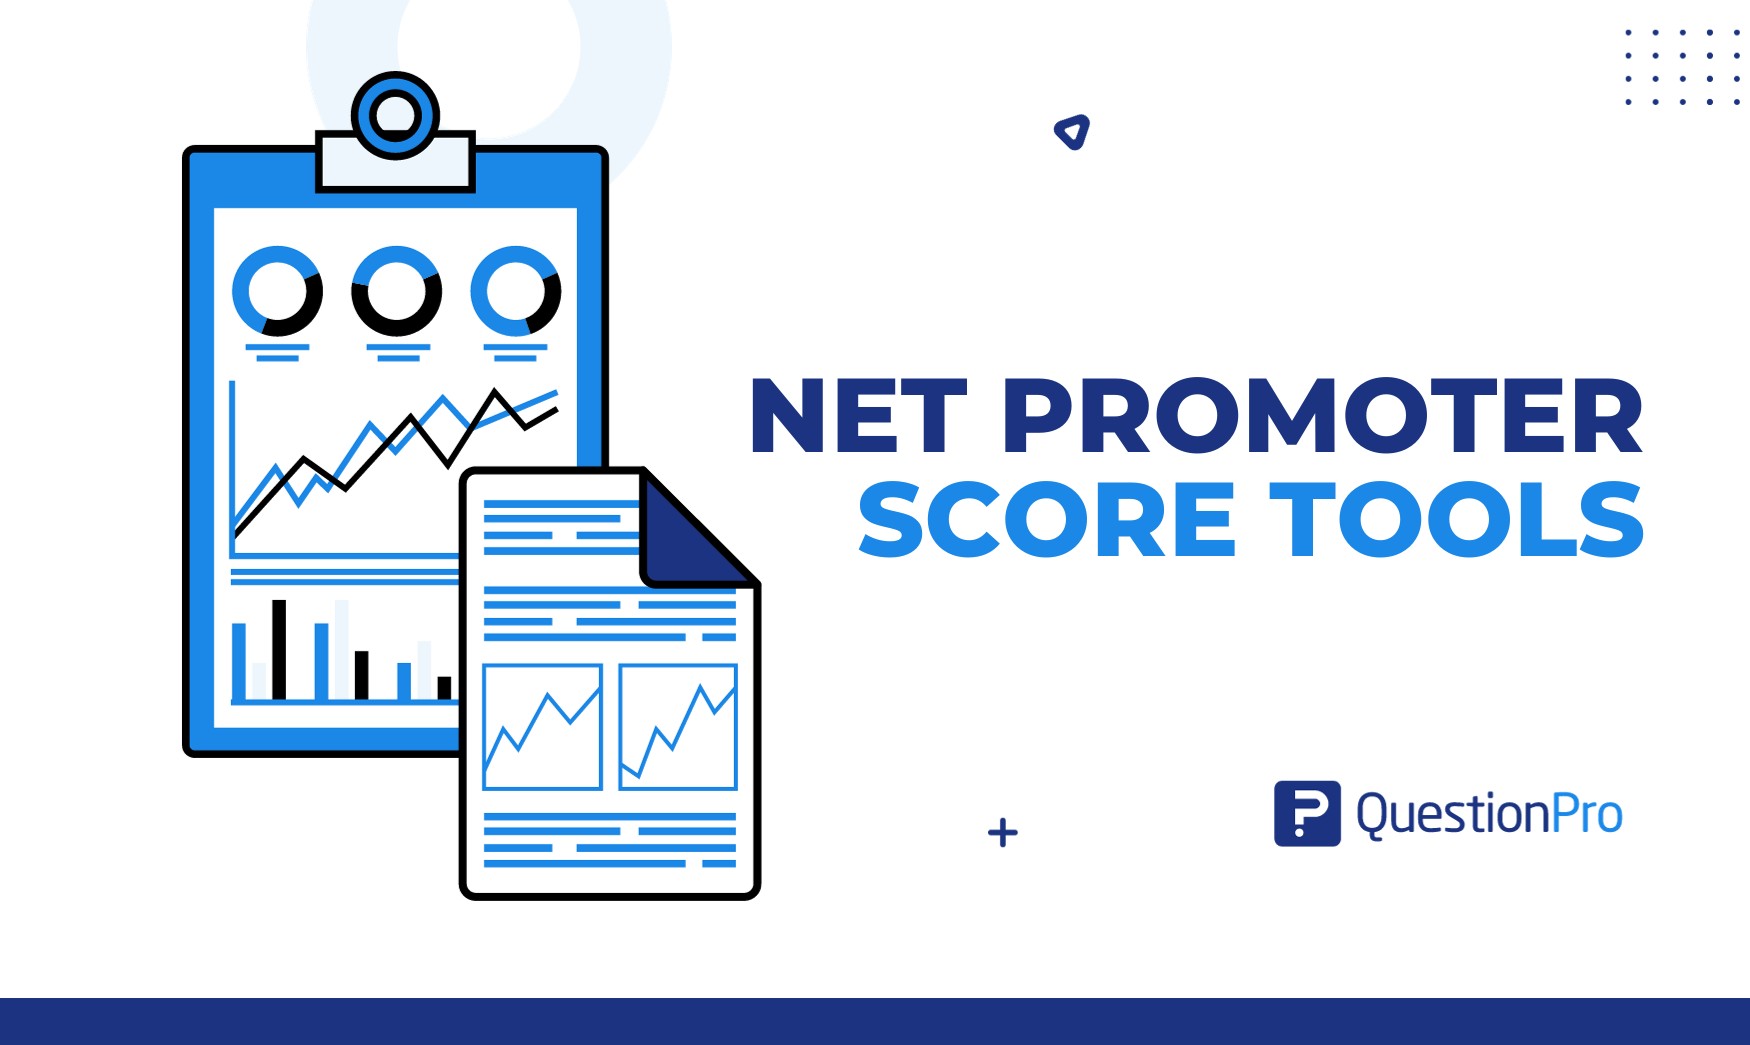 Finding the right Net promoter score tools is important for a business. Discover the top 12 NPS tools that can enhance customer loyalty.